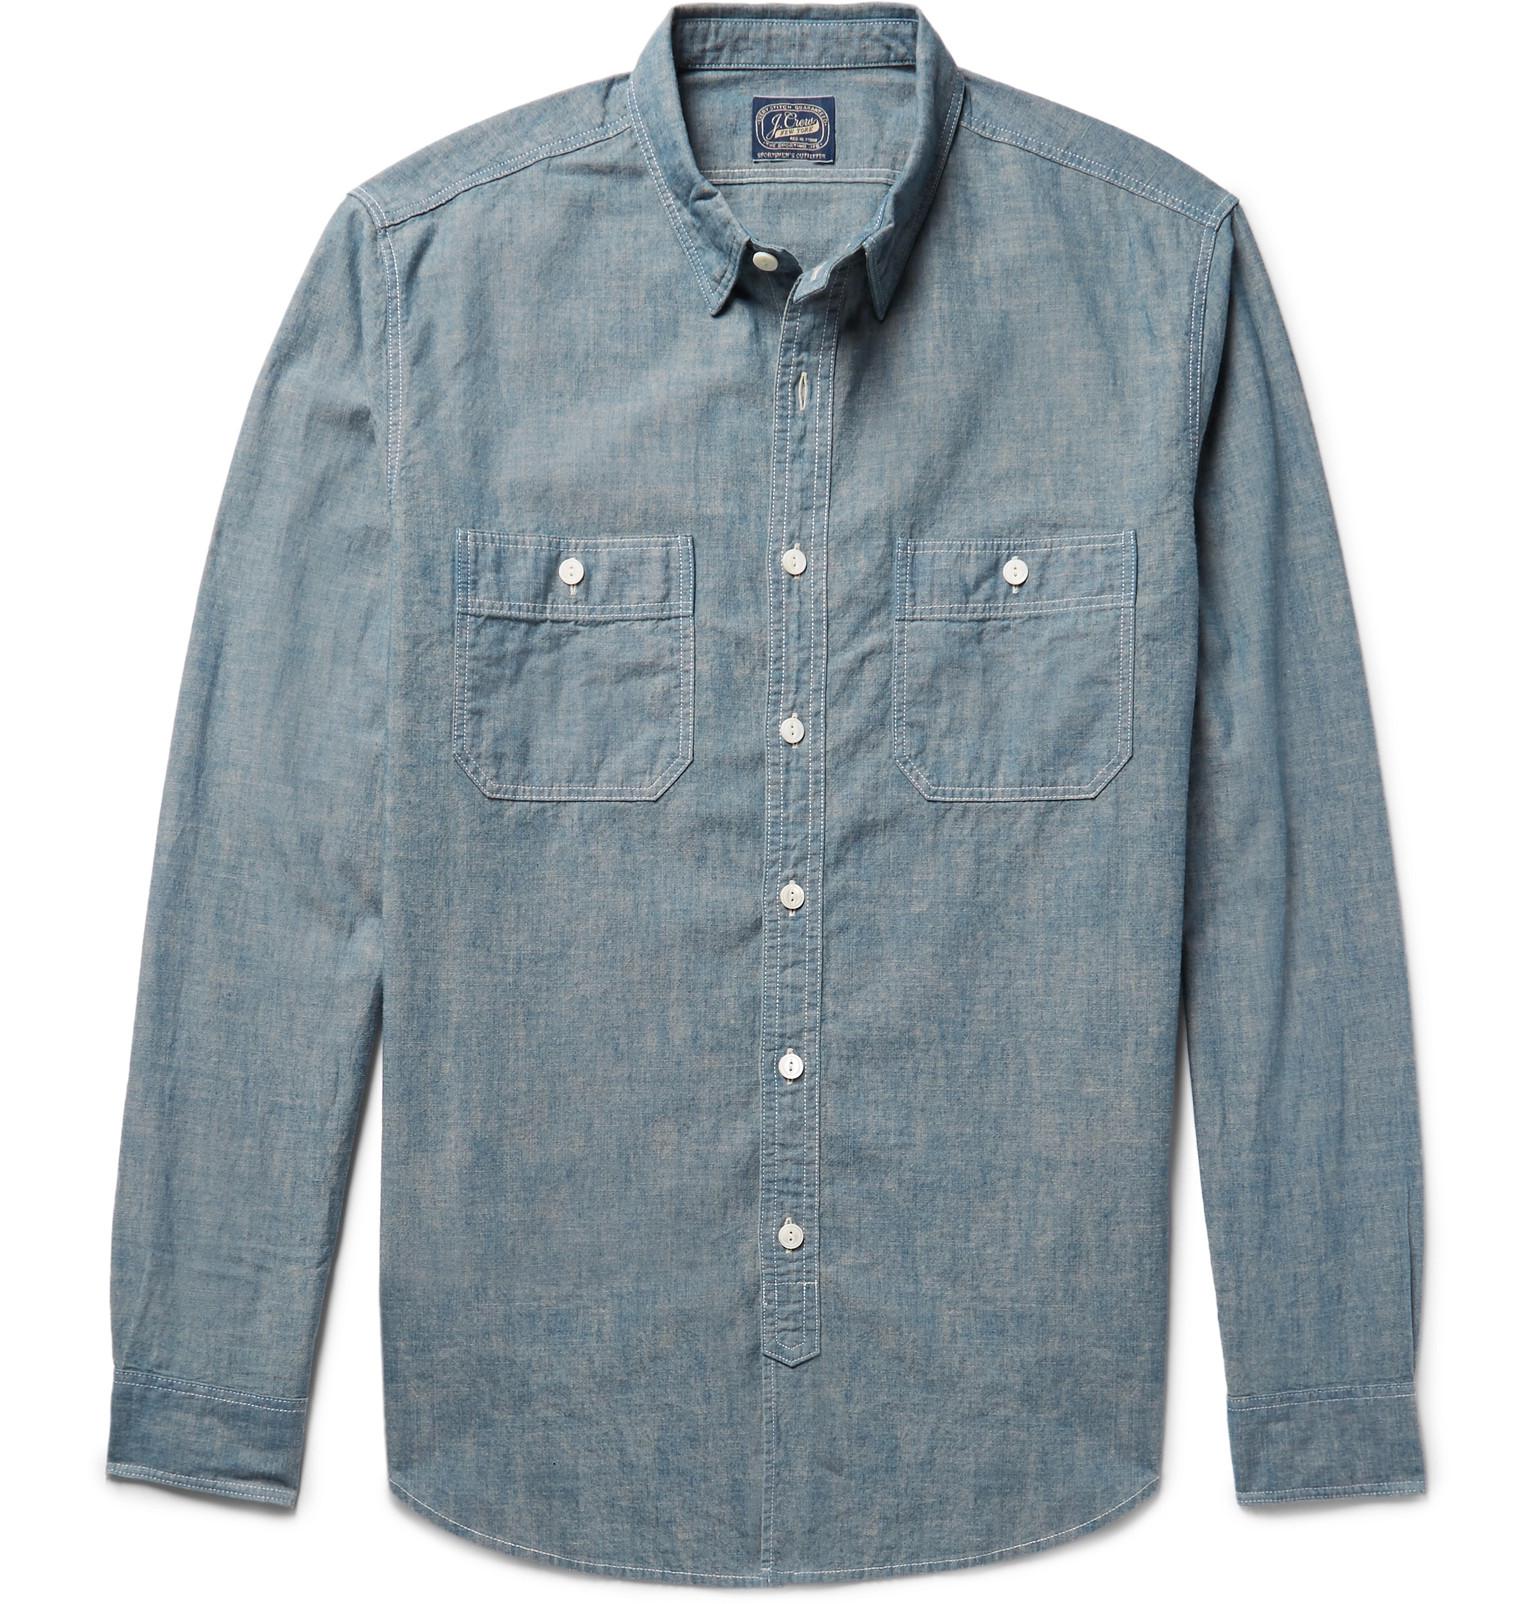 Lyst - J.Crew Cotton-chambray Shirt in Blue for Men